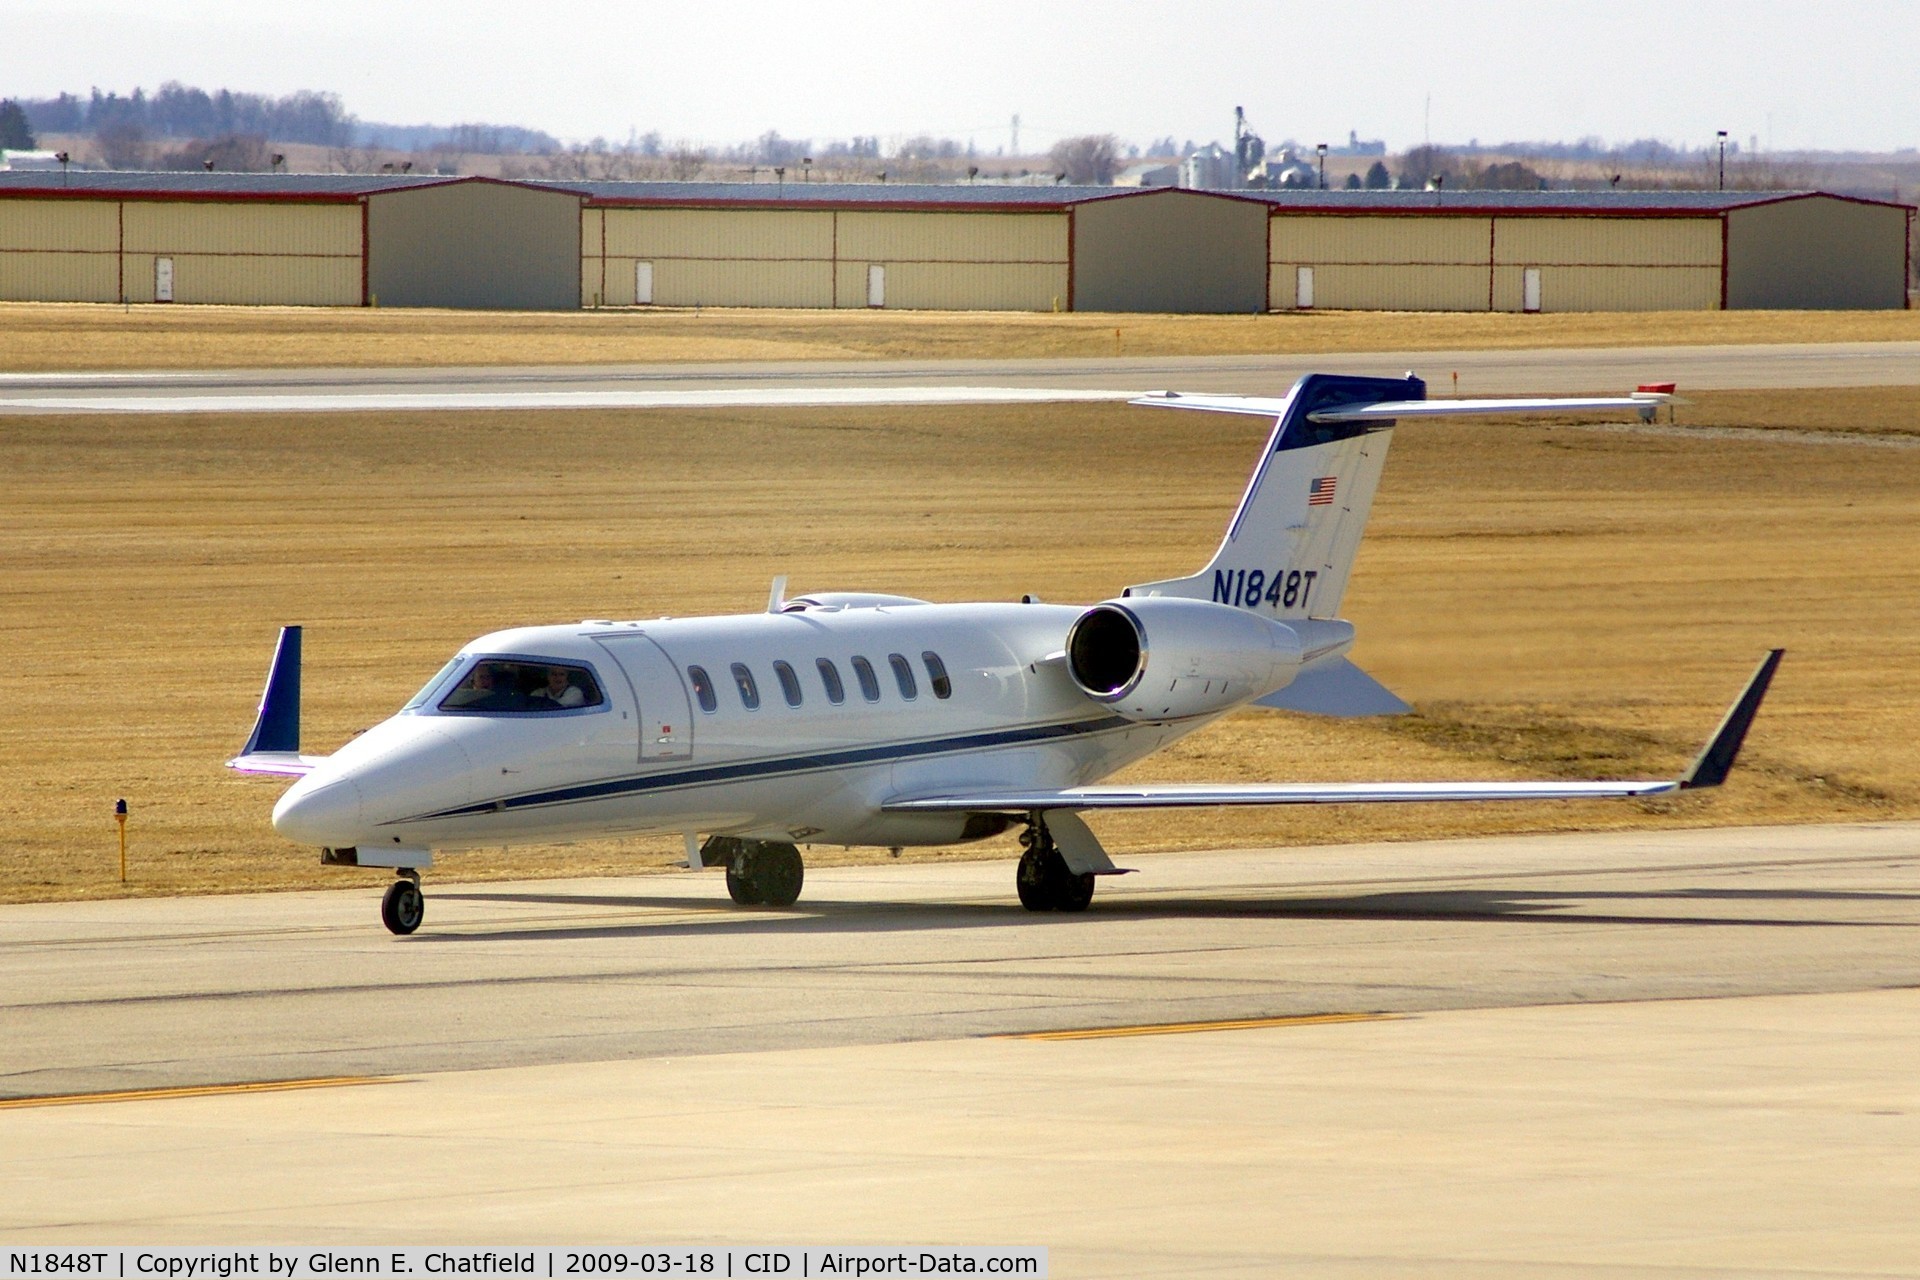 N1848T, 2005 Learjet 45 C/N 2035, About to pull into Landmark FBO from taxiway D after landing runway 31